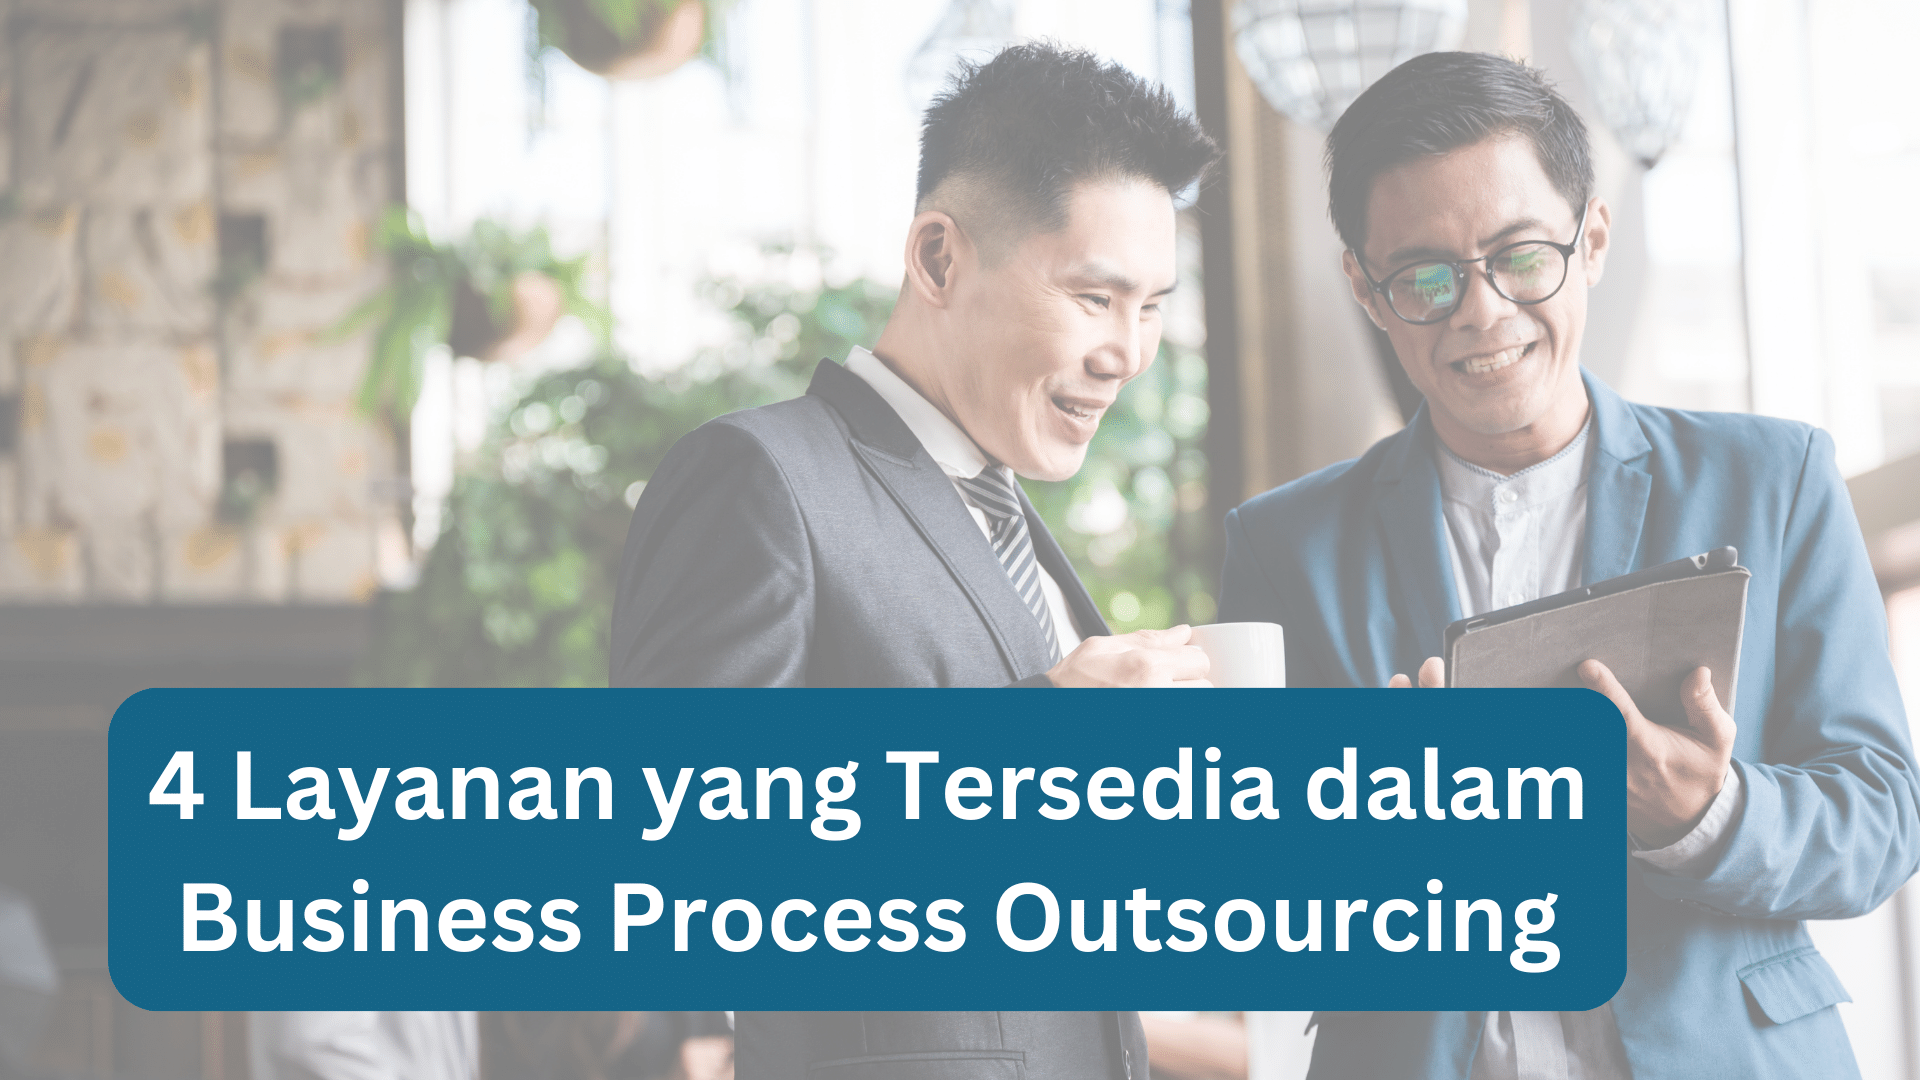 Image of 4 Services Available in Business Process Outsourcing